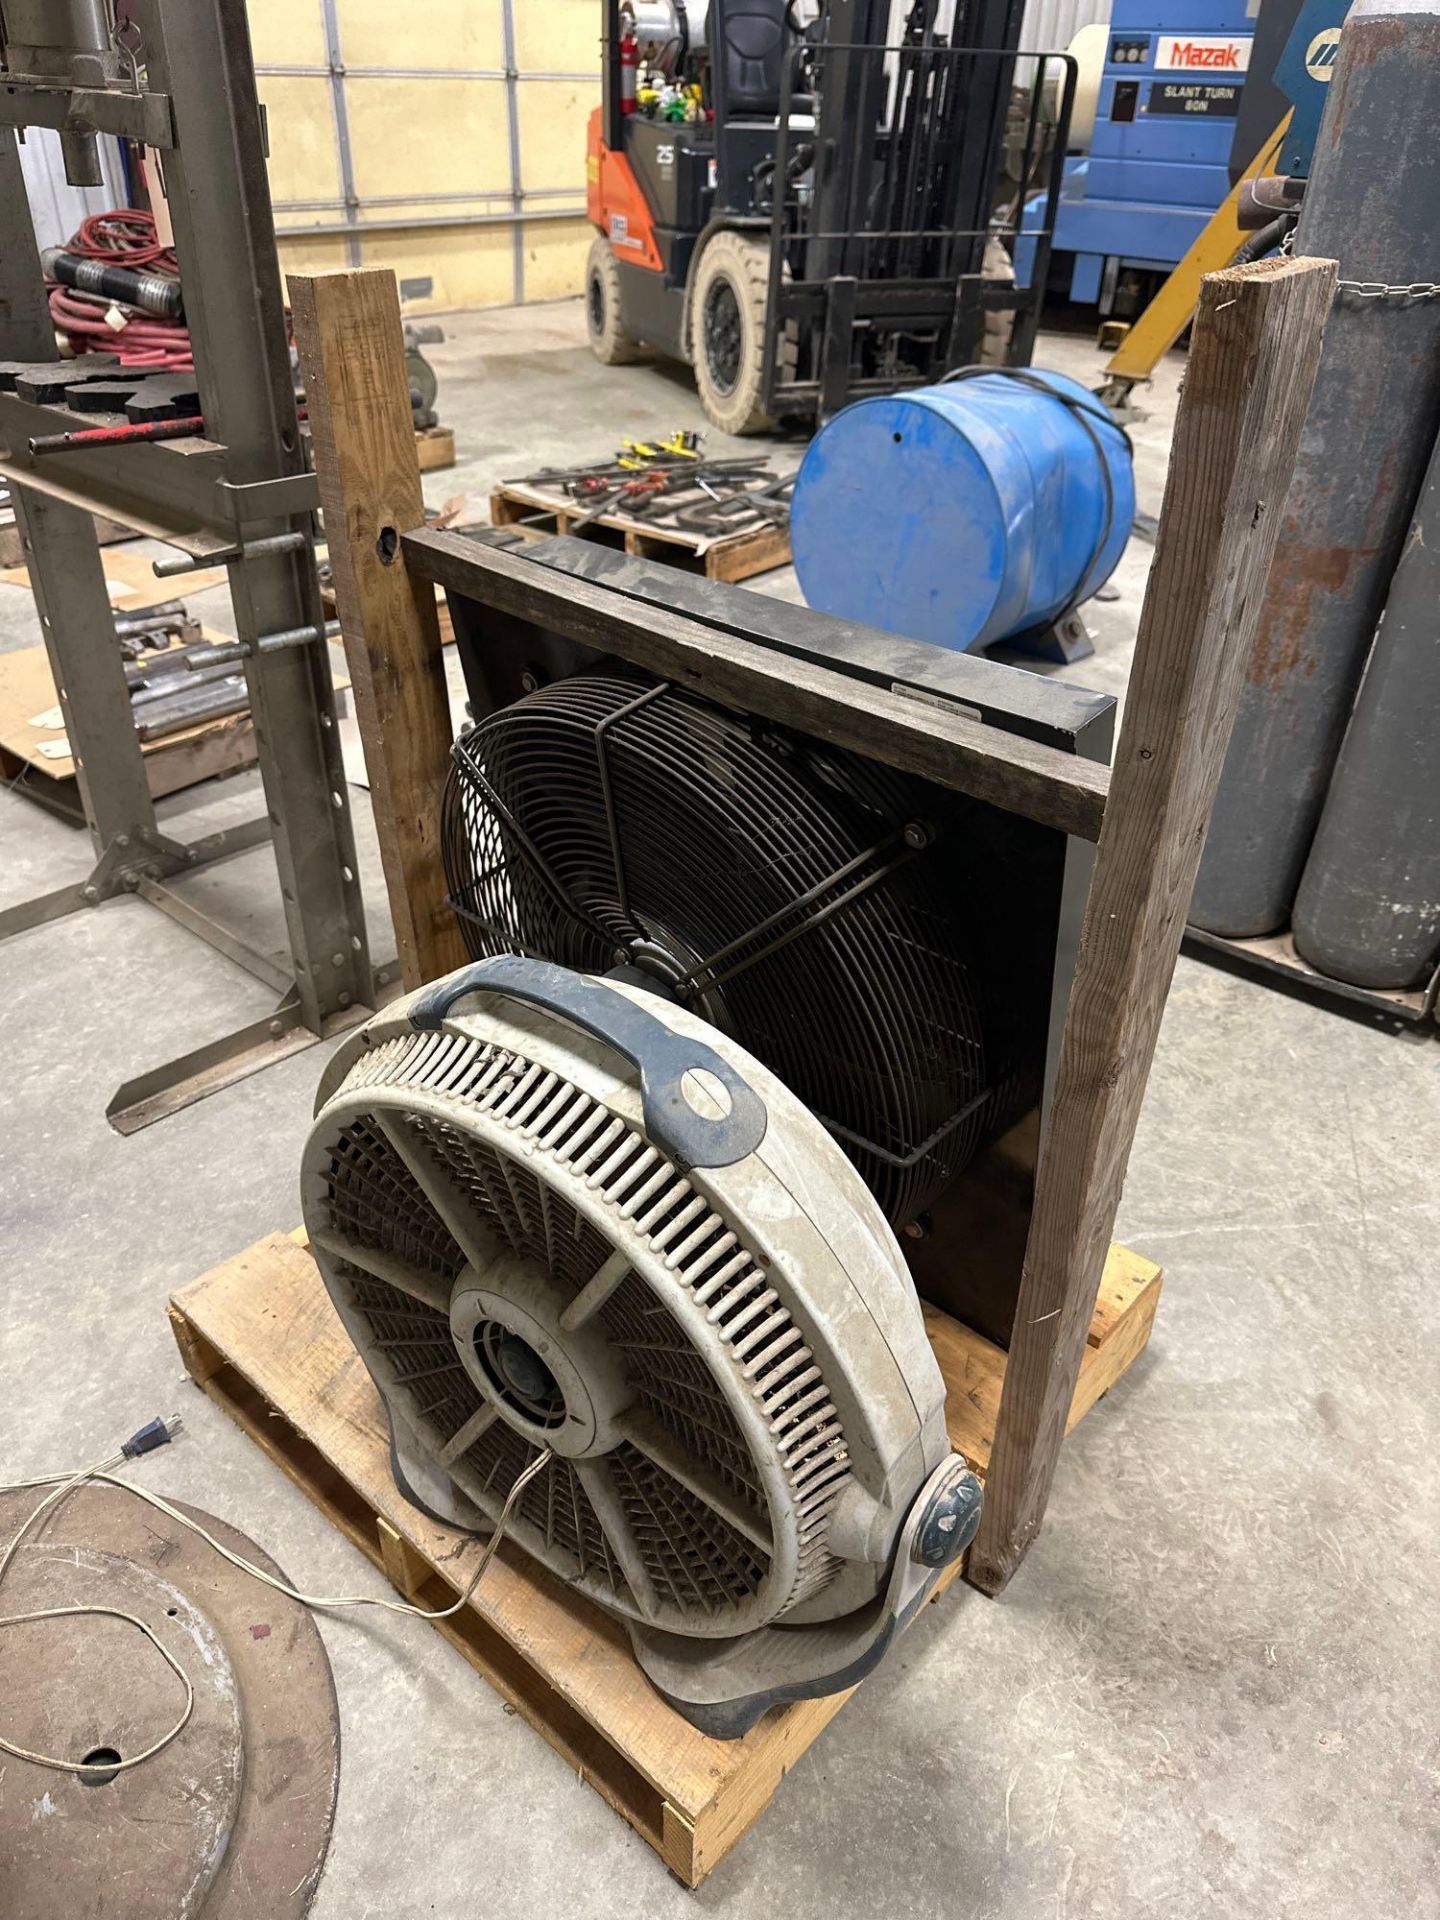 Lot of 3 Shop Fans. See photo.